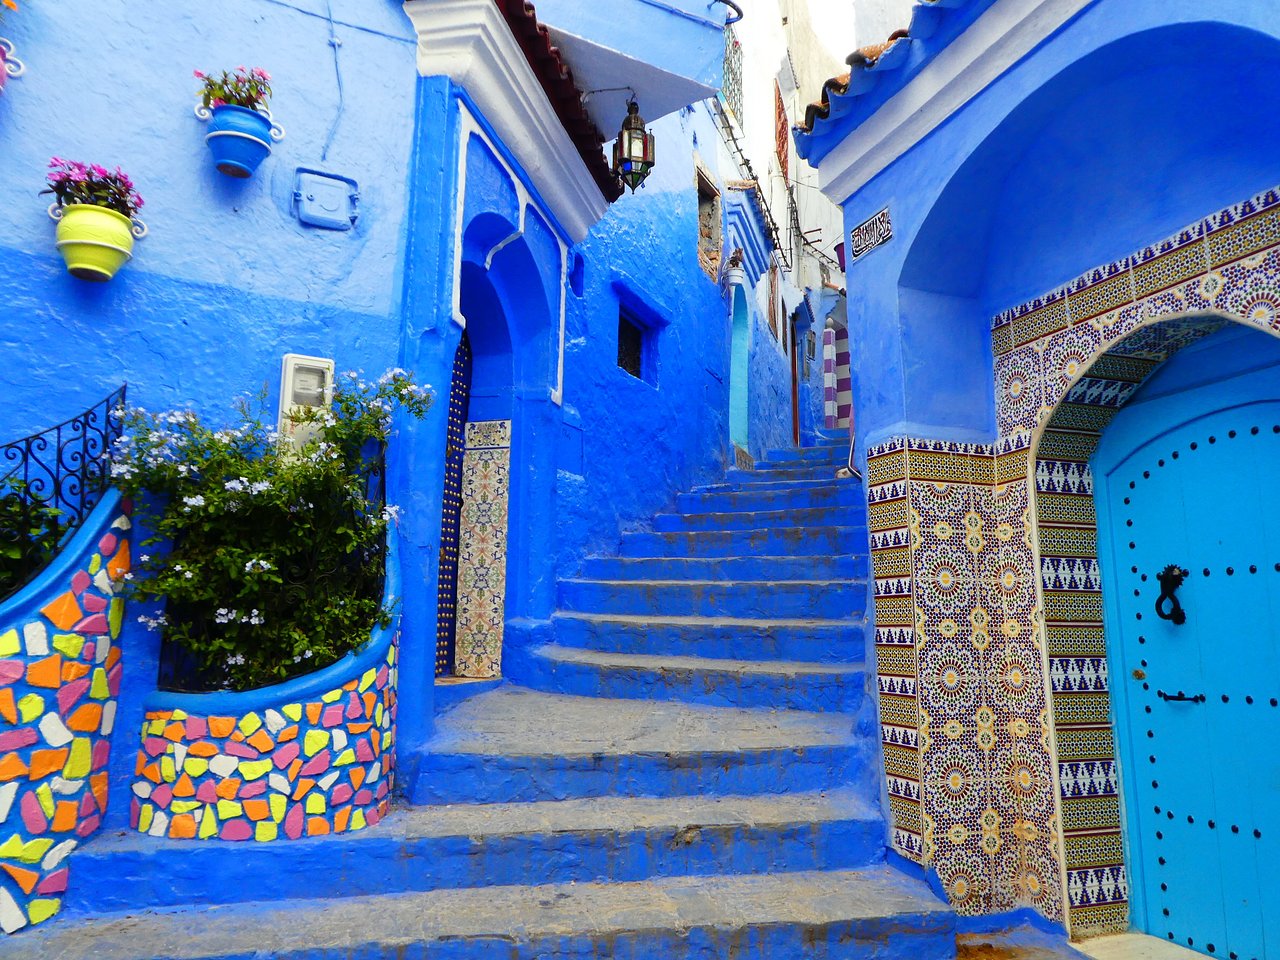 Explore Chefchaouen and its blue painting